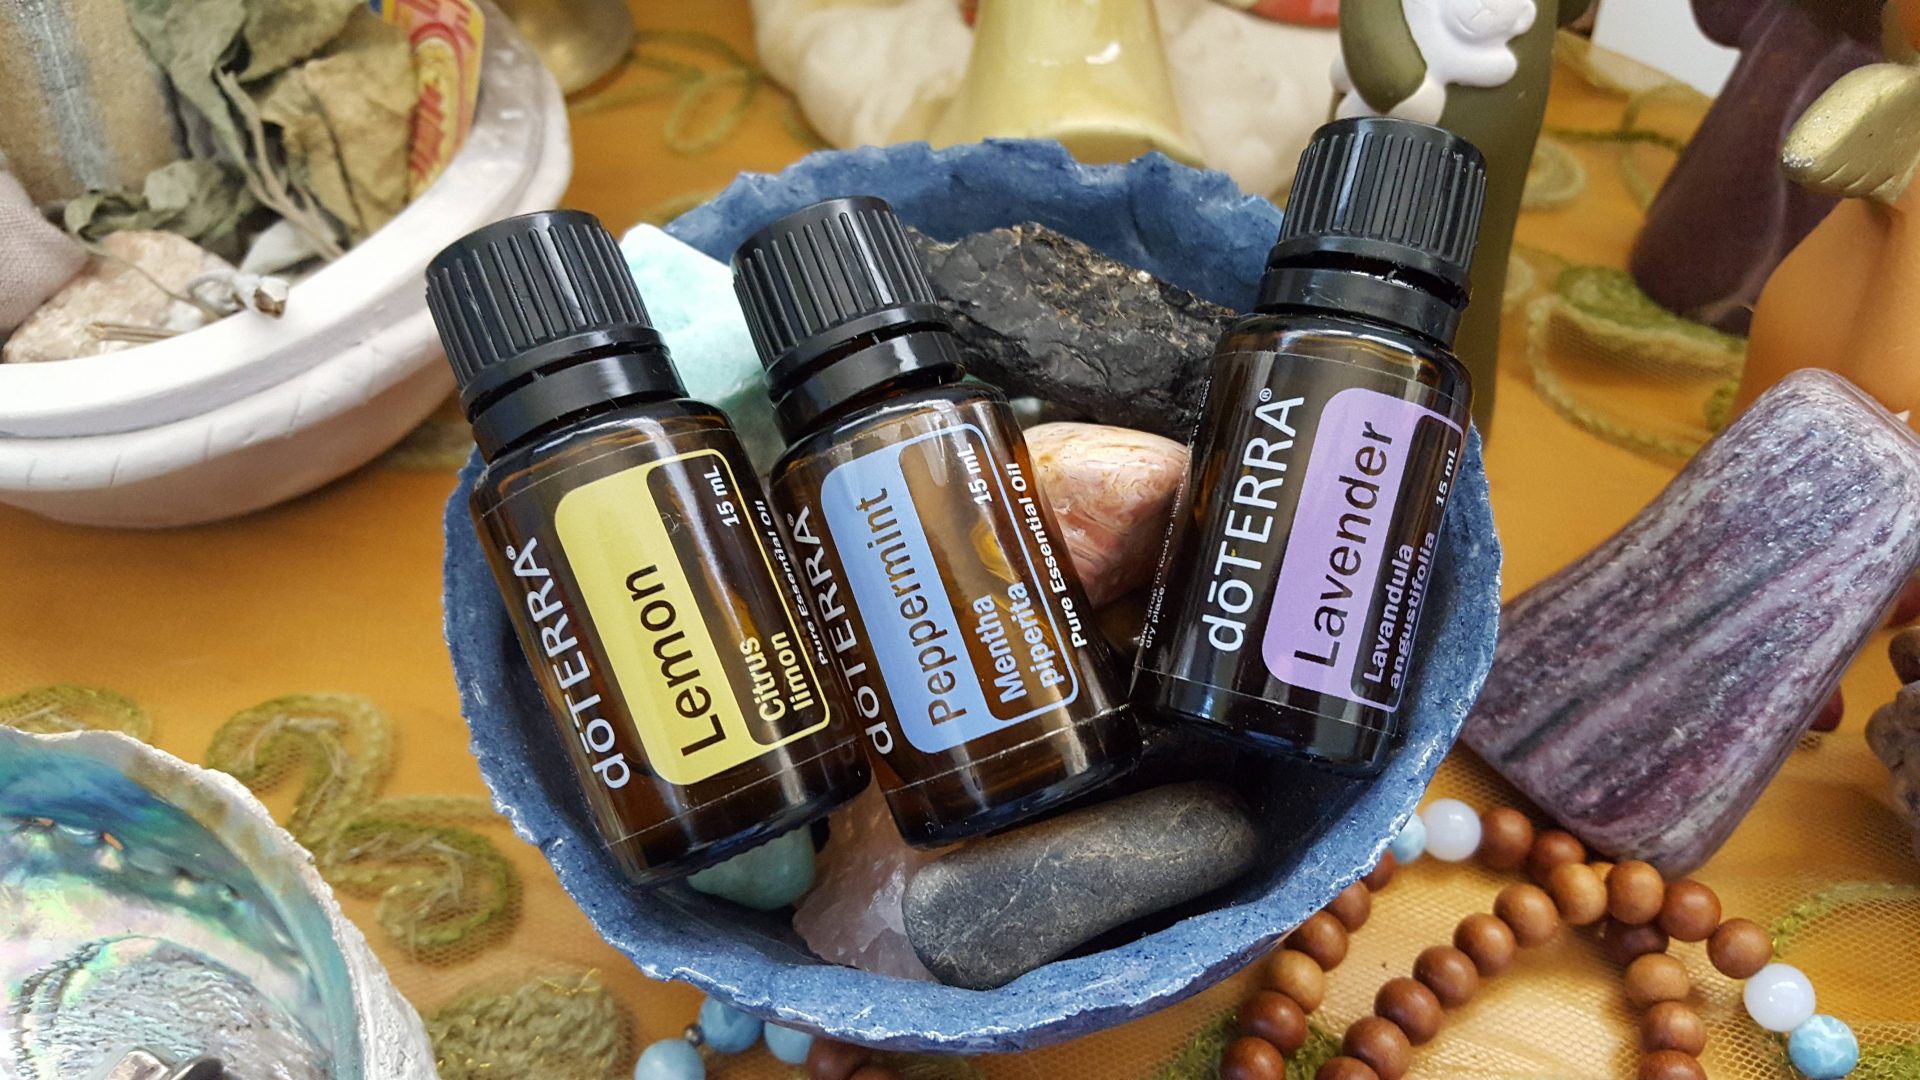 doTERRA Essential Oils New Zealand - All you need is LOVE and